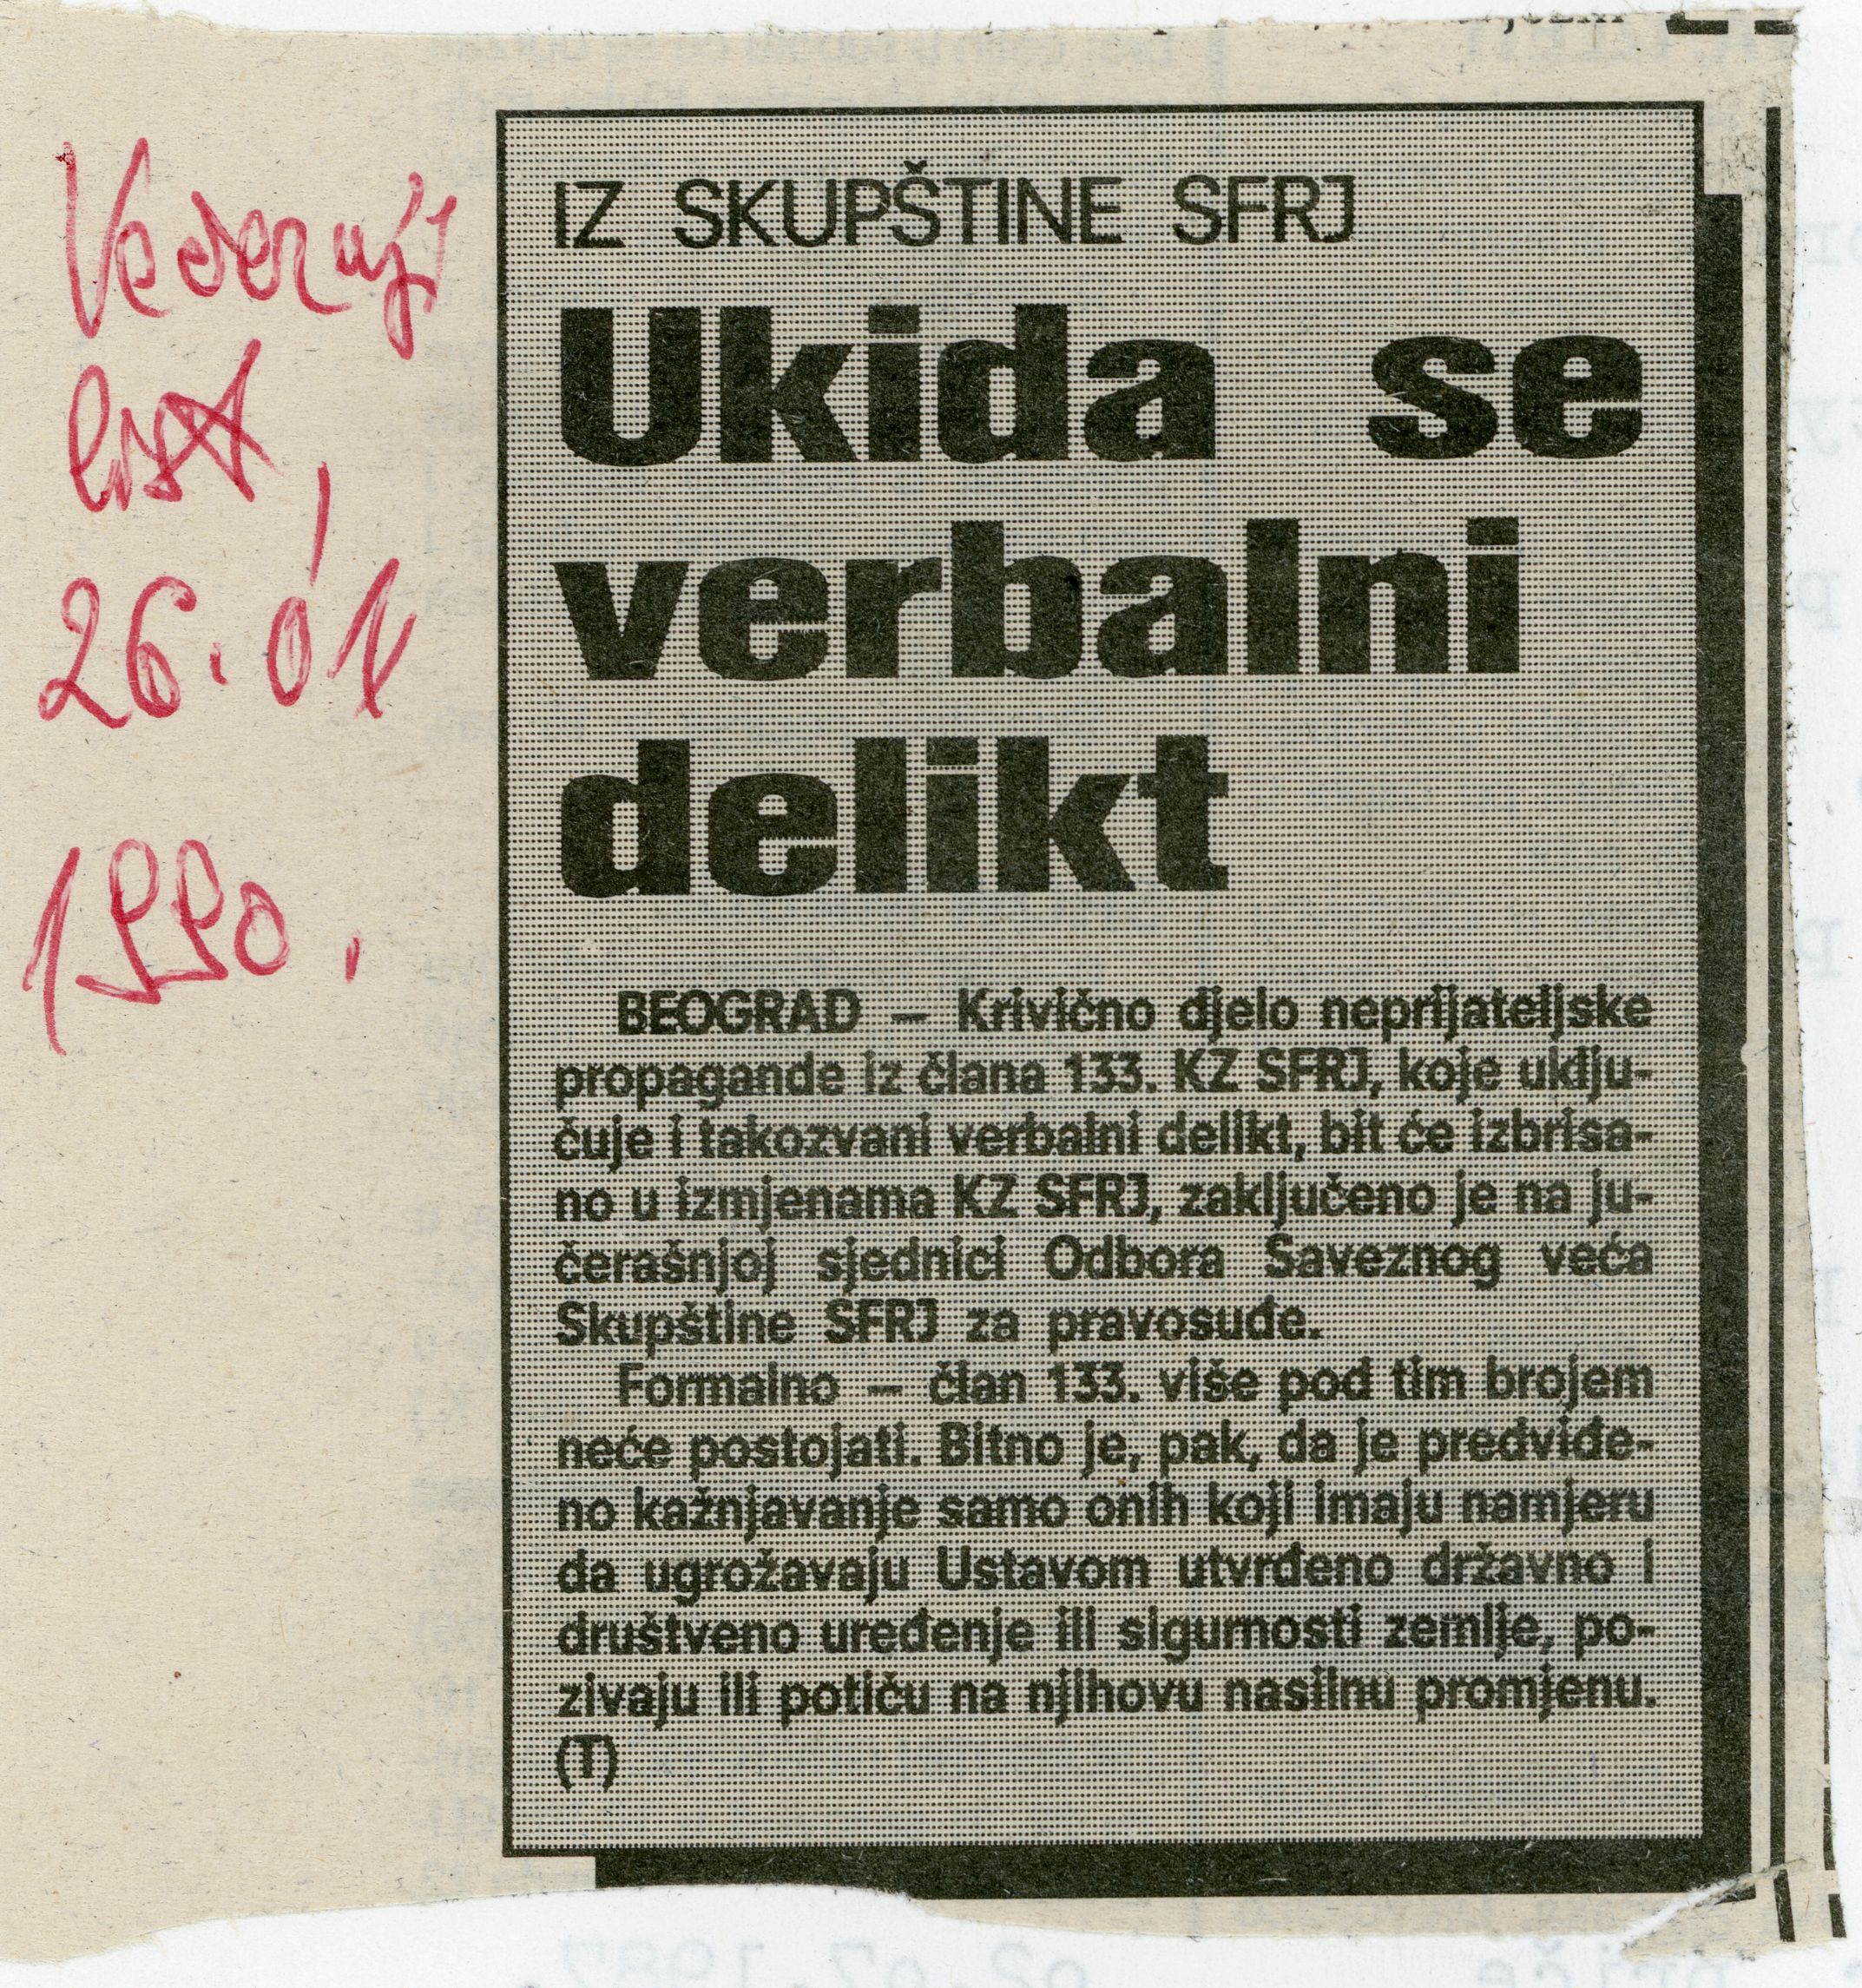 Press clipping 'The Verbal delict is being abolished', Večernji list, 26. April 1990